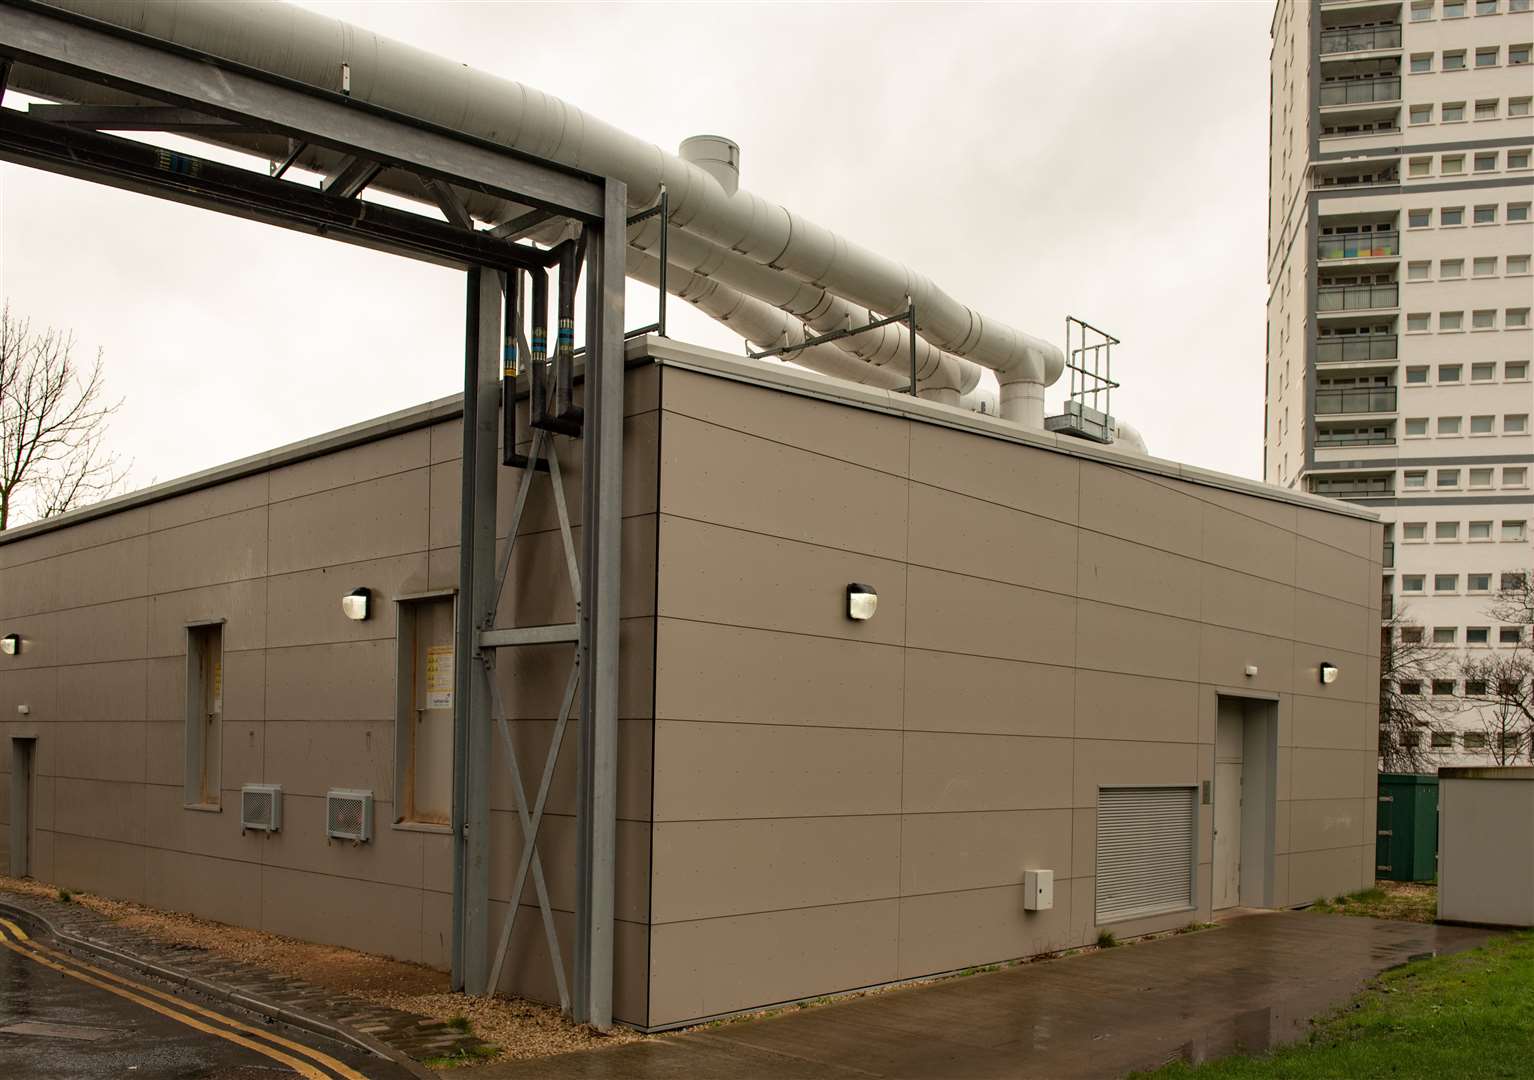 District heating systems such as this one in Broomhill, Glasgow, offer scope to reduce carbon emissions from heat.